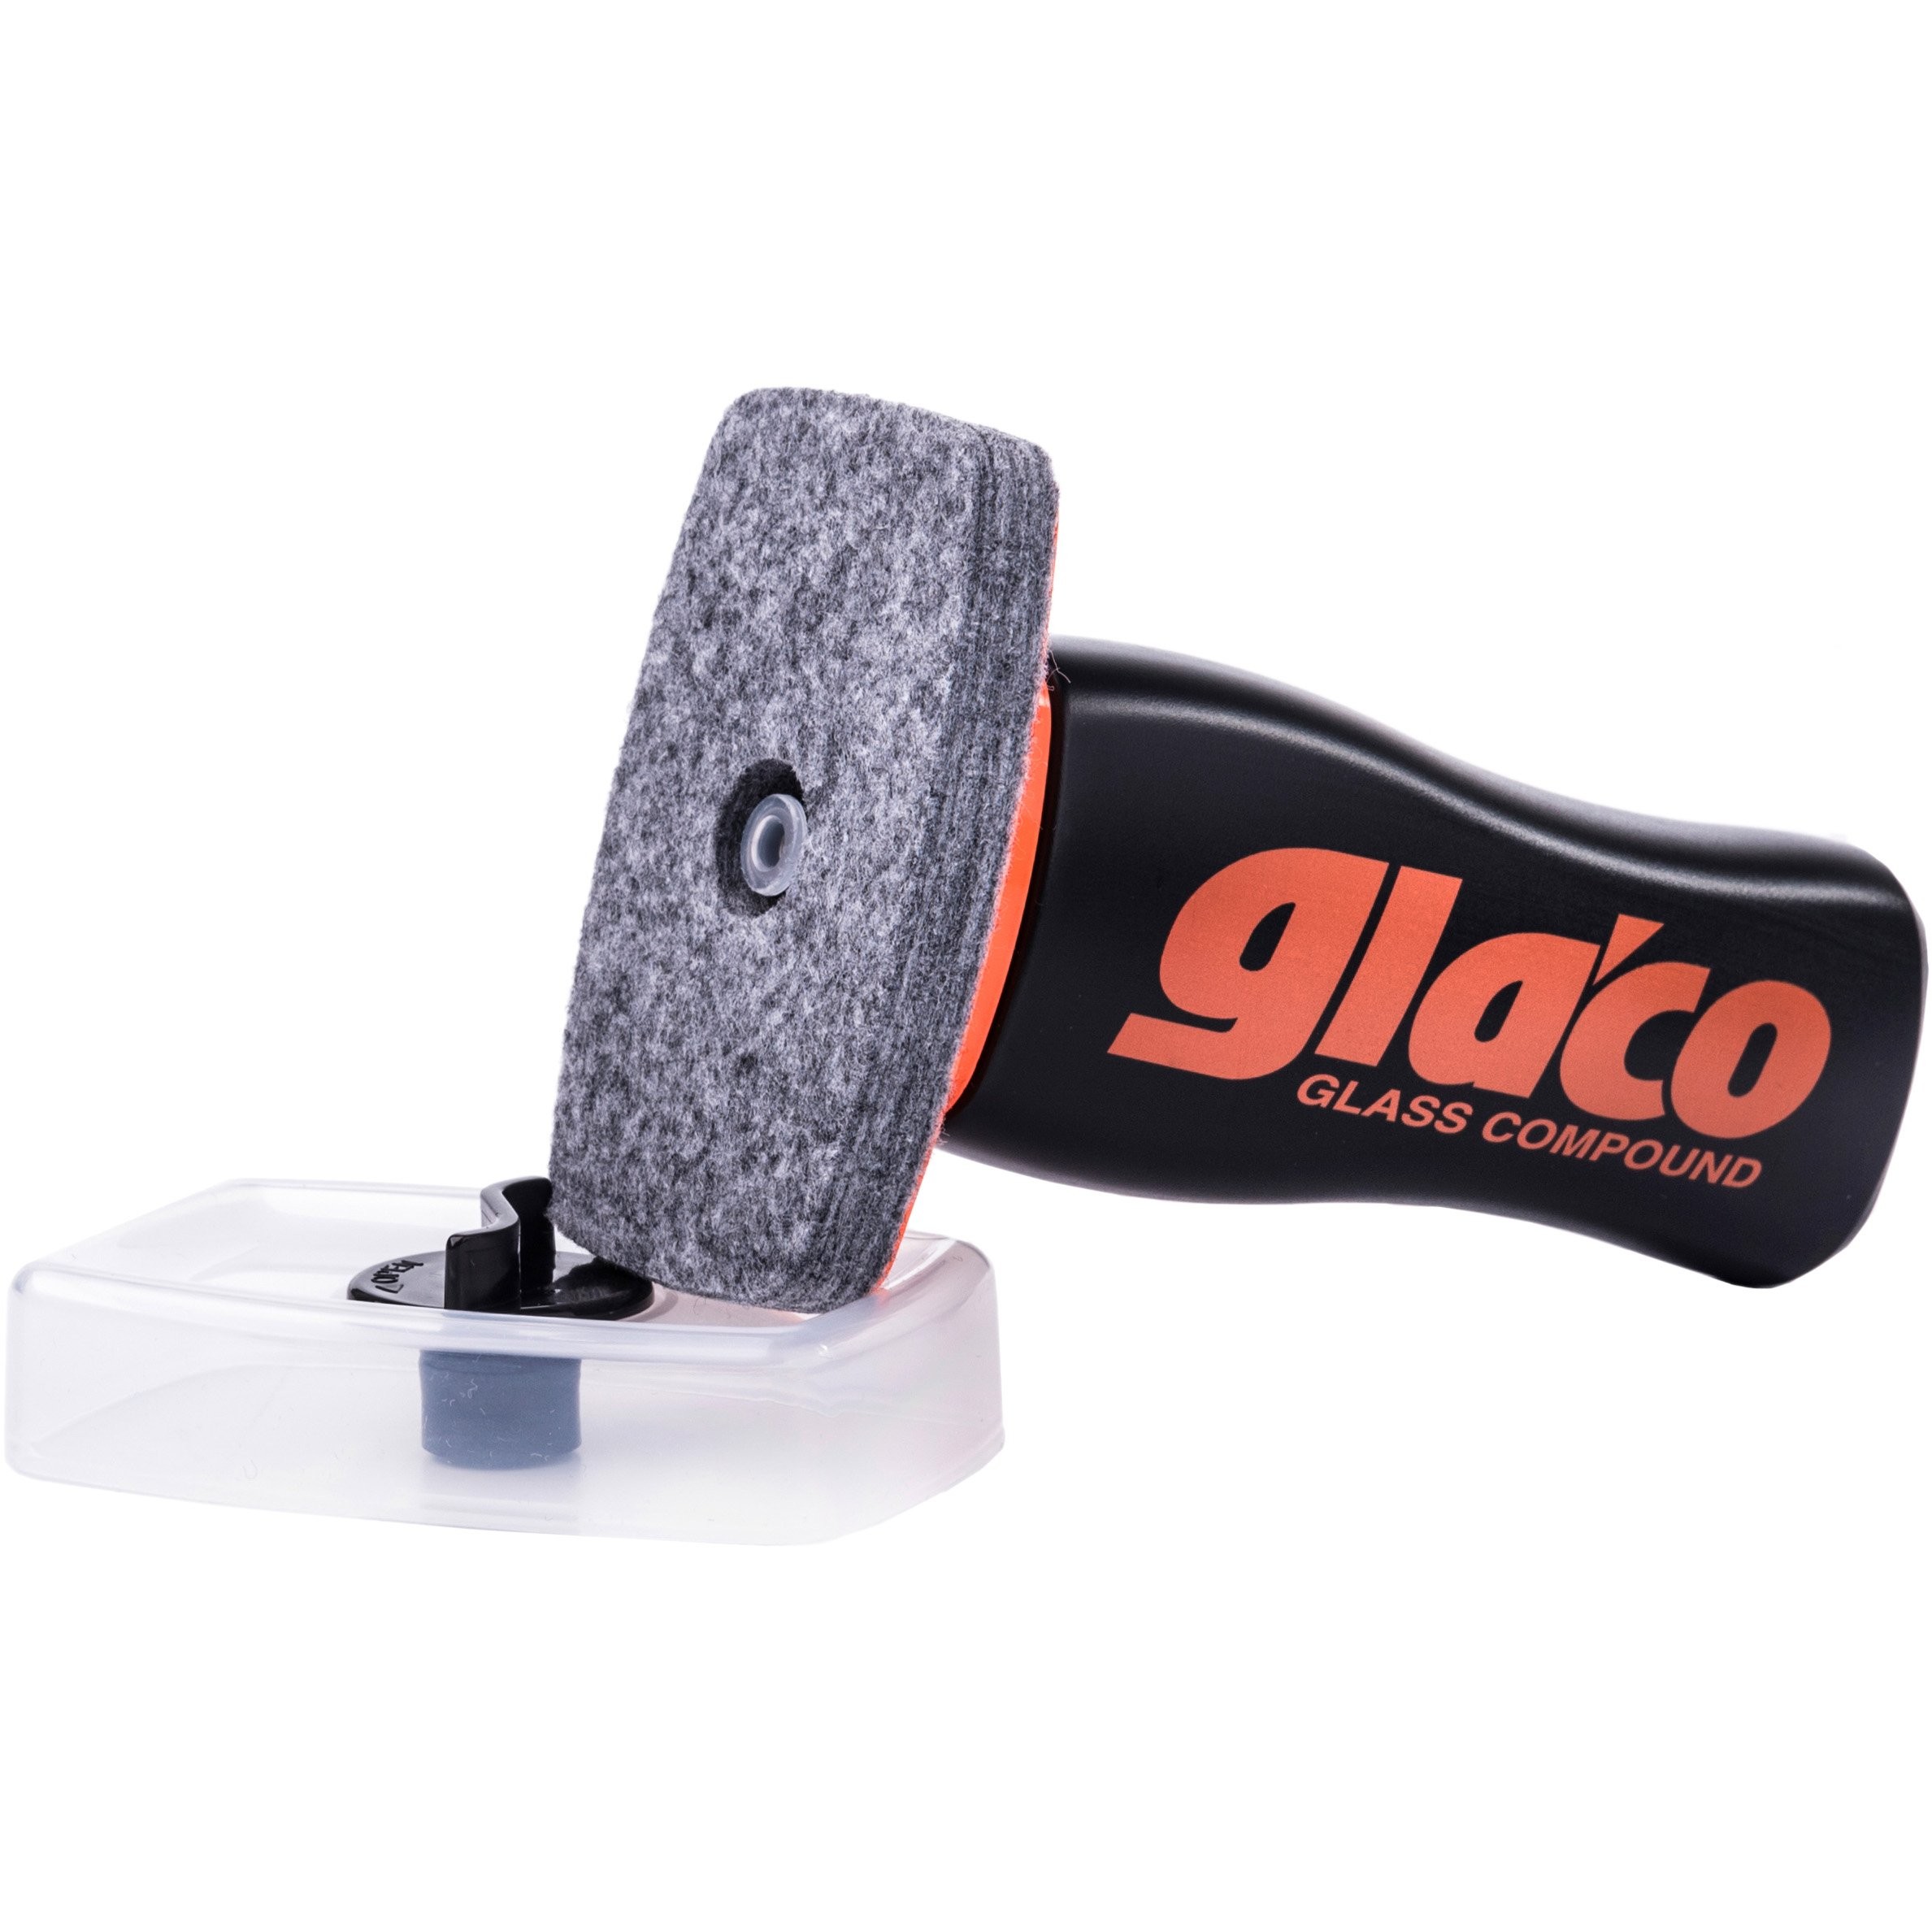 SOFT99 Glaco Glass Compound Roll On, 100ml - Nettoyage de voitures